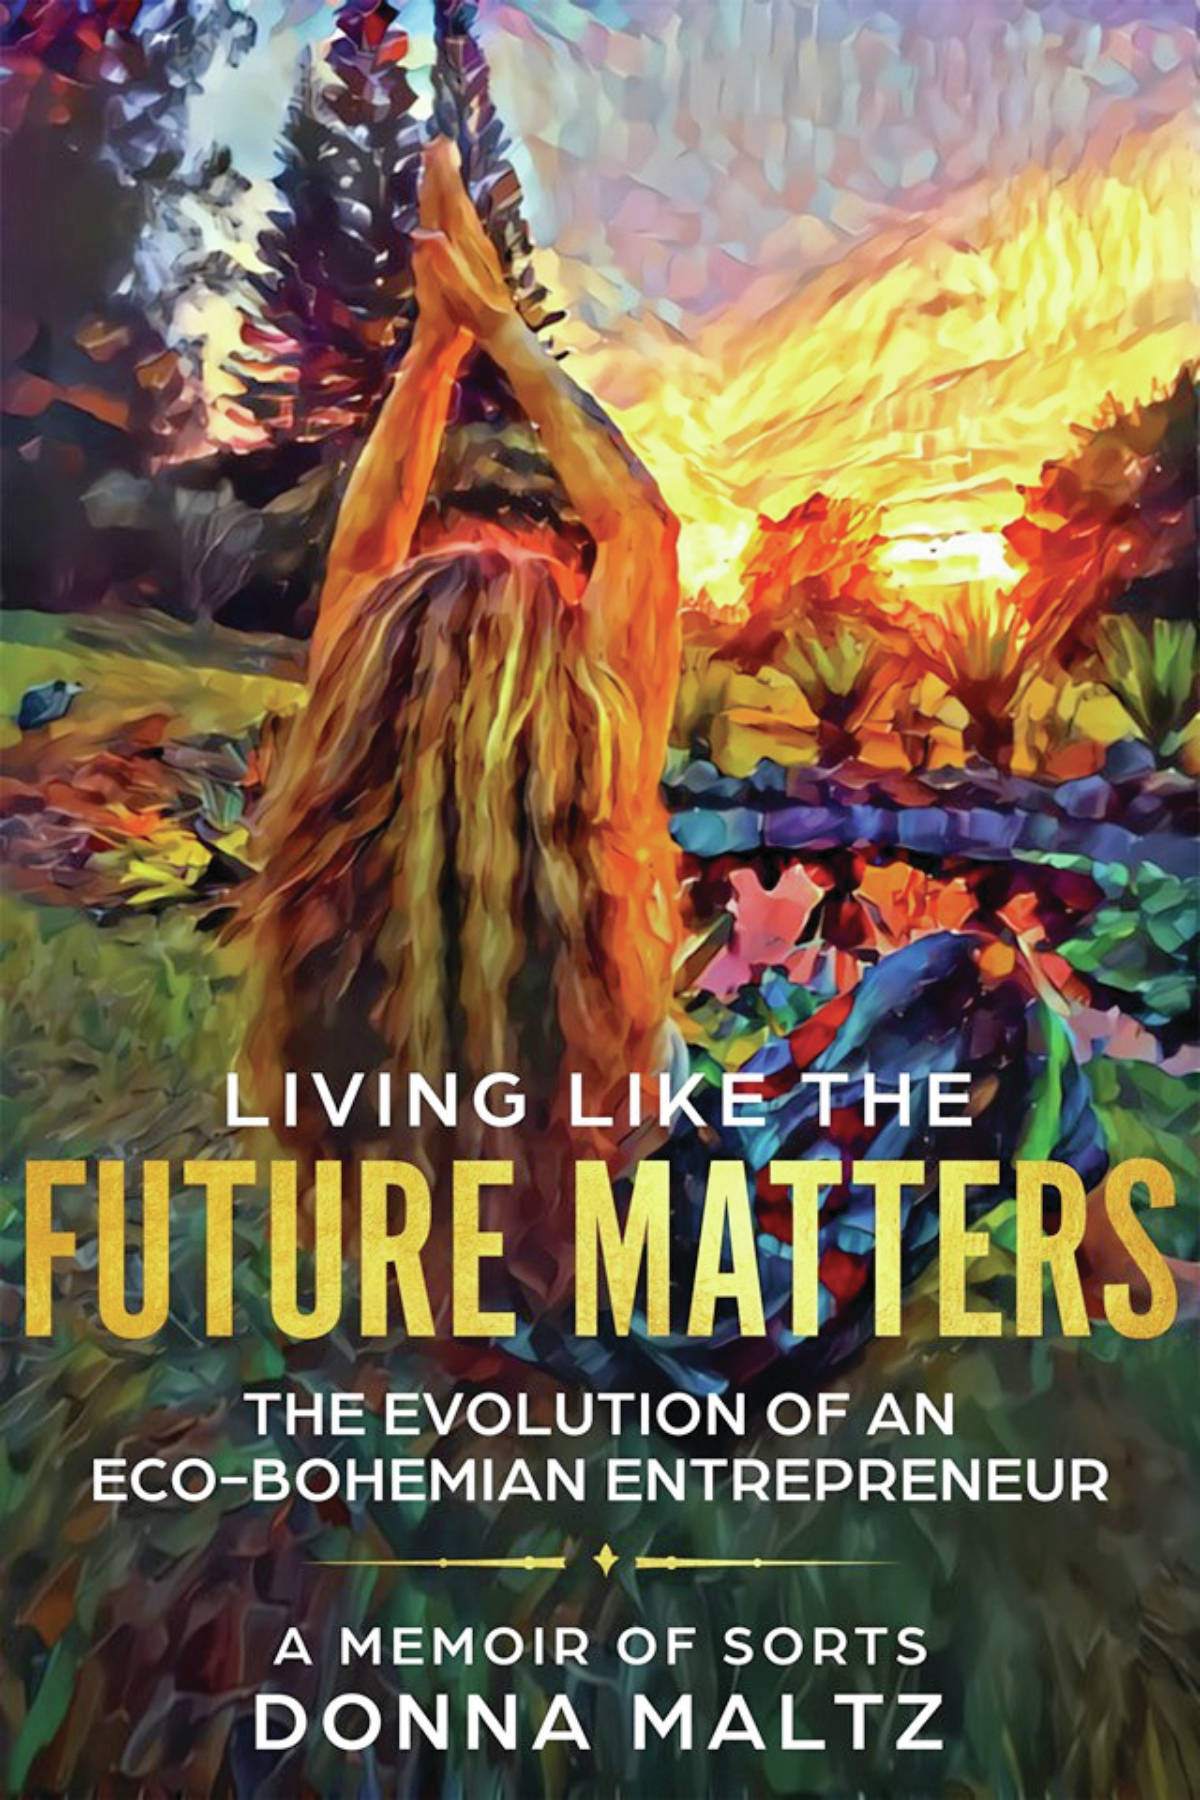 Kirsten English’s cover of Donna Maltz’ new book, “Living Like the Future Matters.” (Image provided)